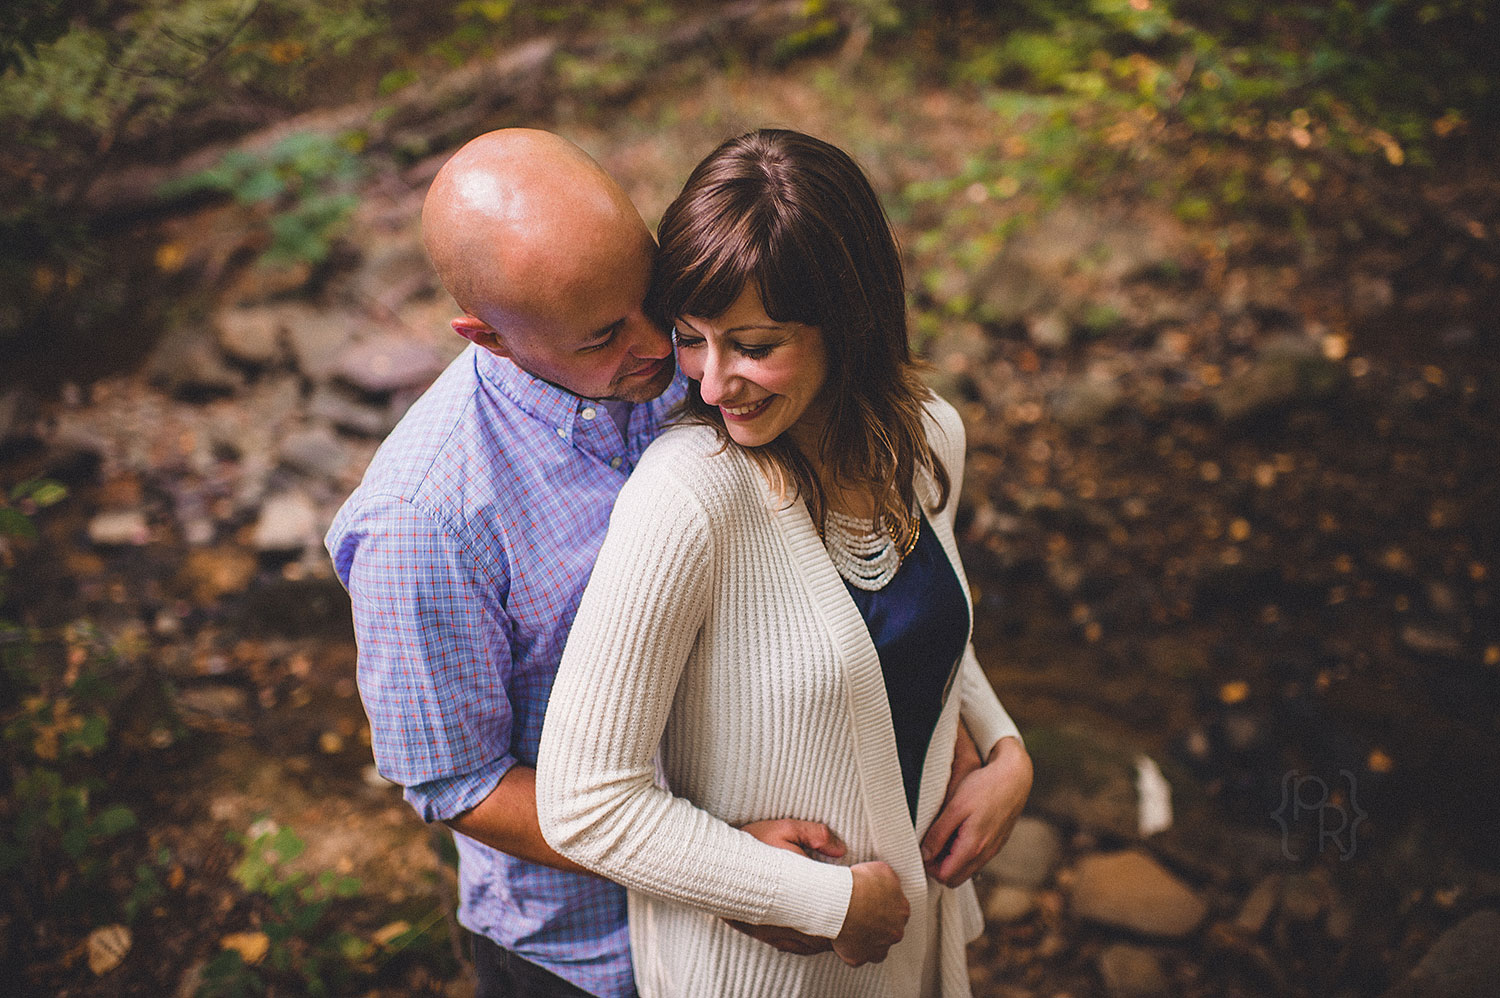 pat-robinson-photography-wilmington-engagement-session-10-2.jpg